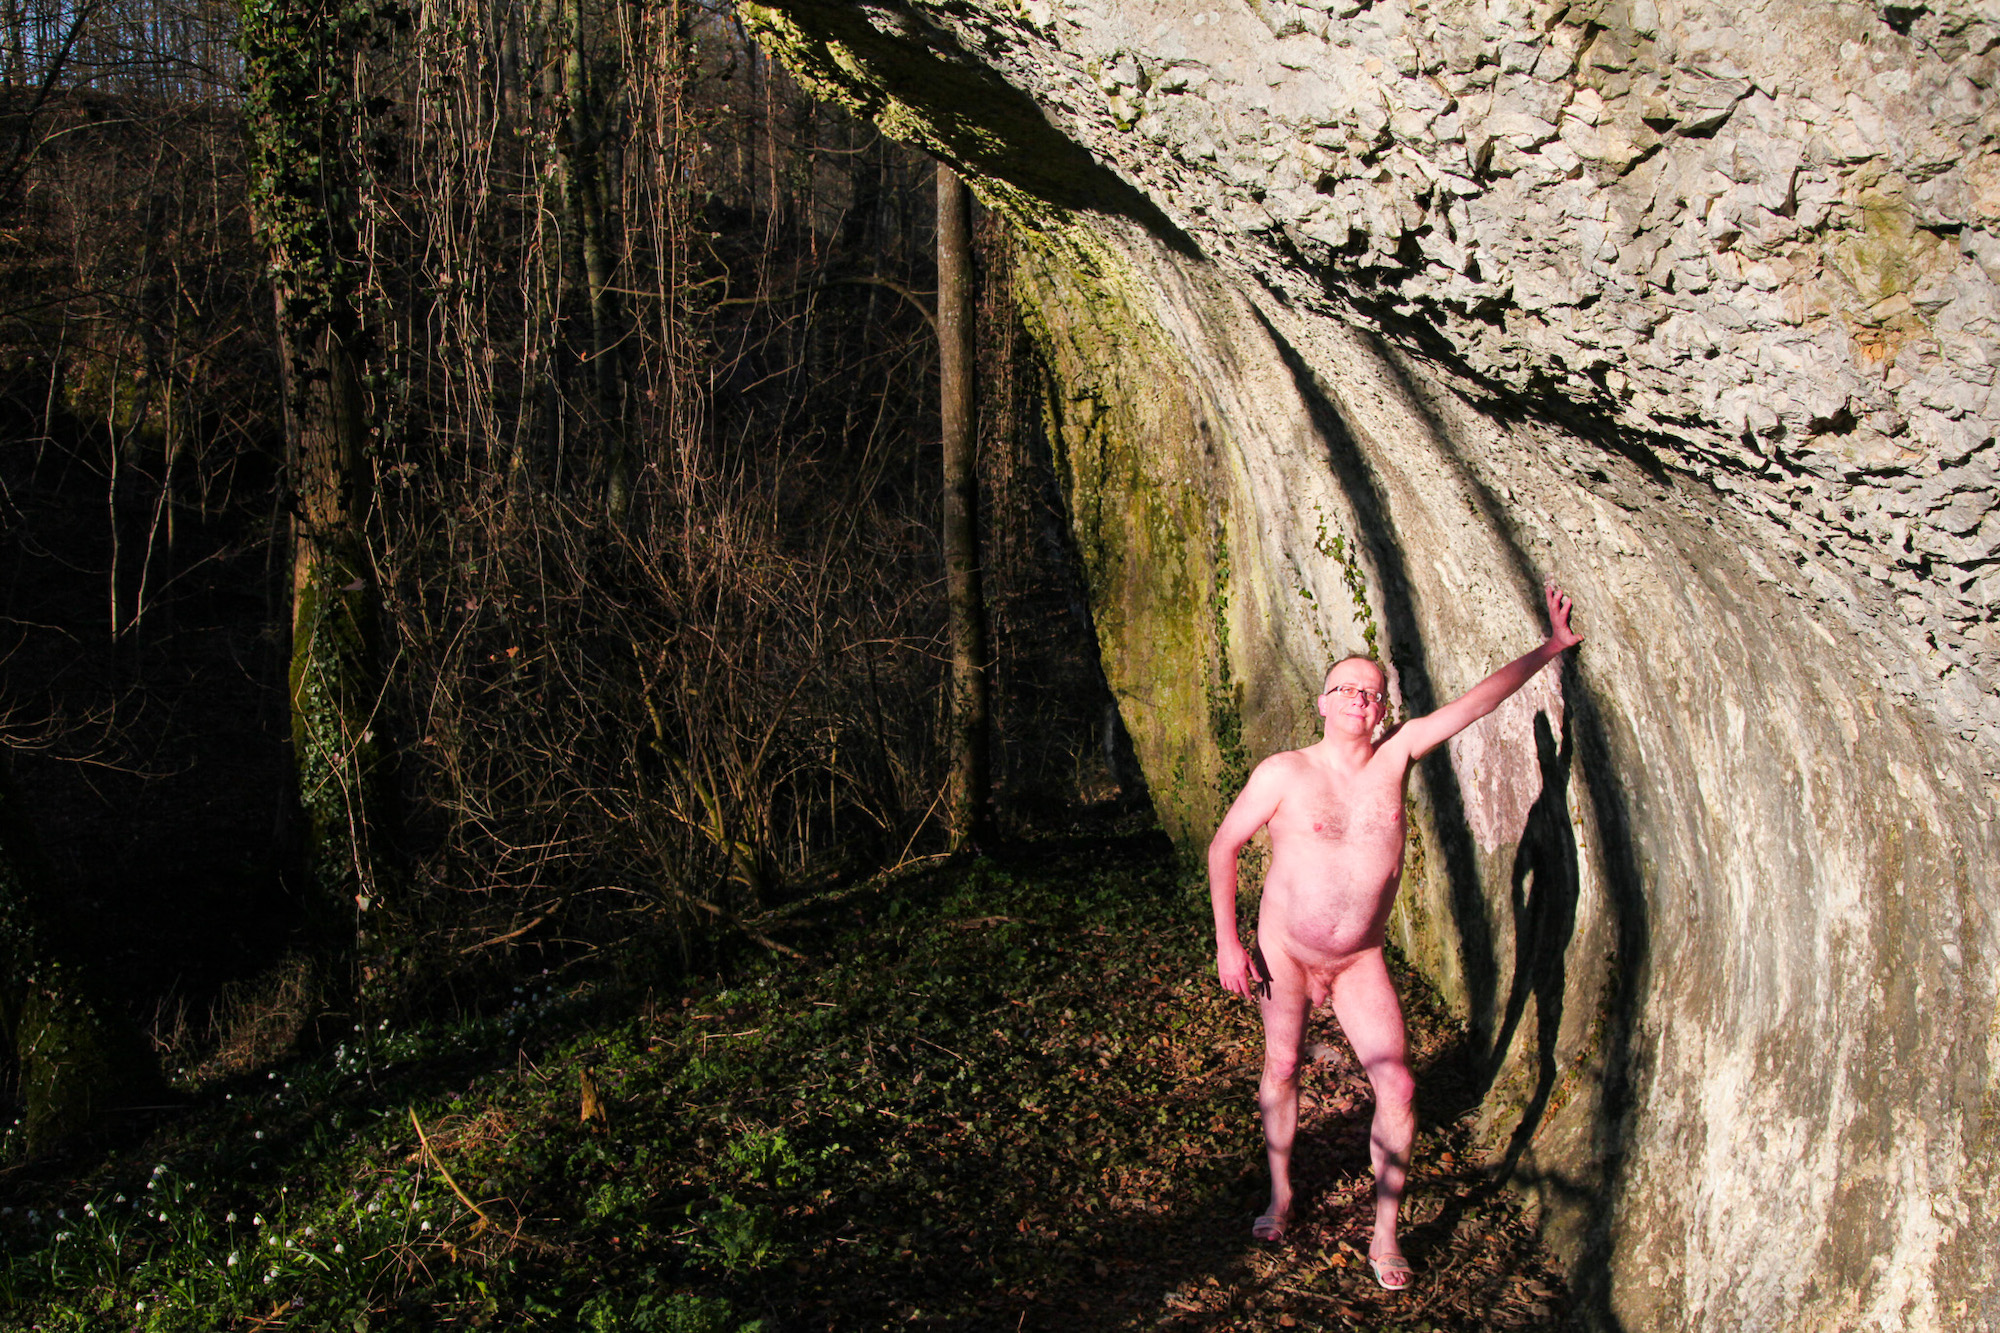 Male nude showing his genitals in Germany